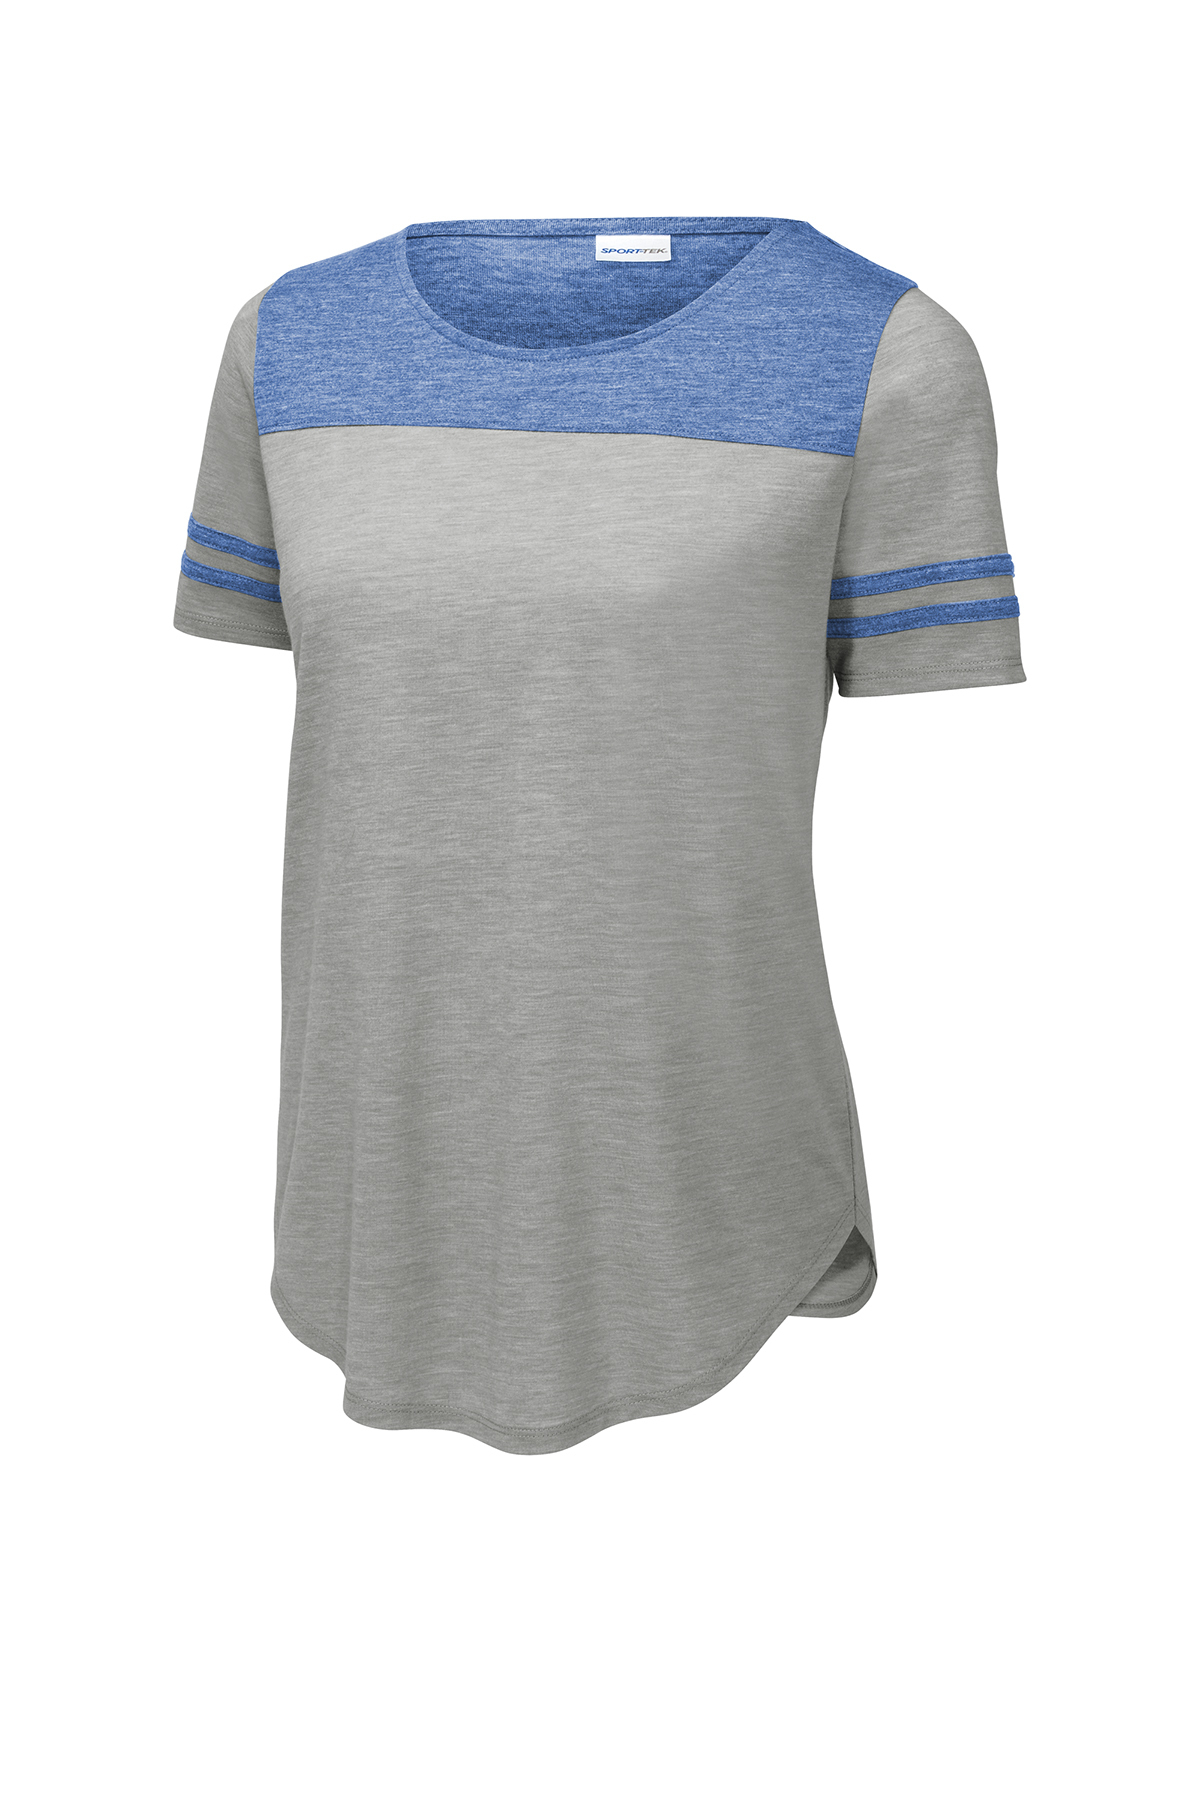 click to view True Royal Heather/ Light Grey Heather